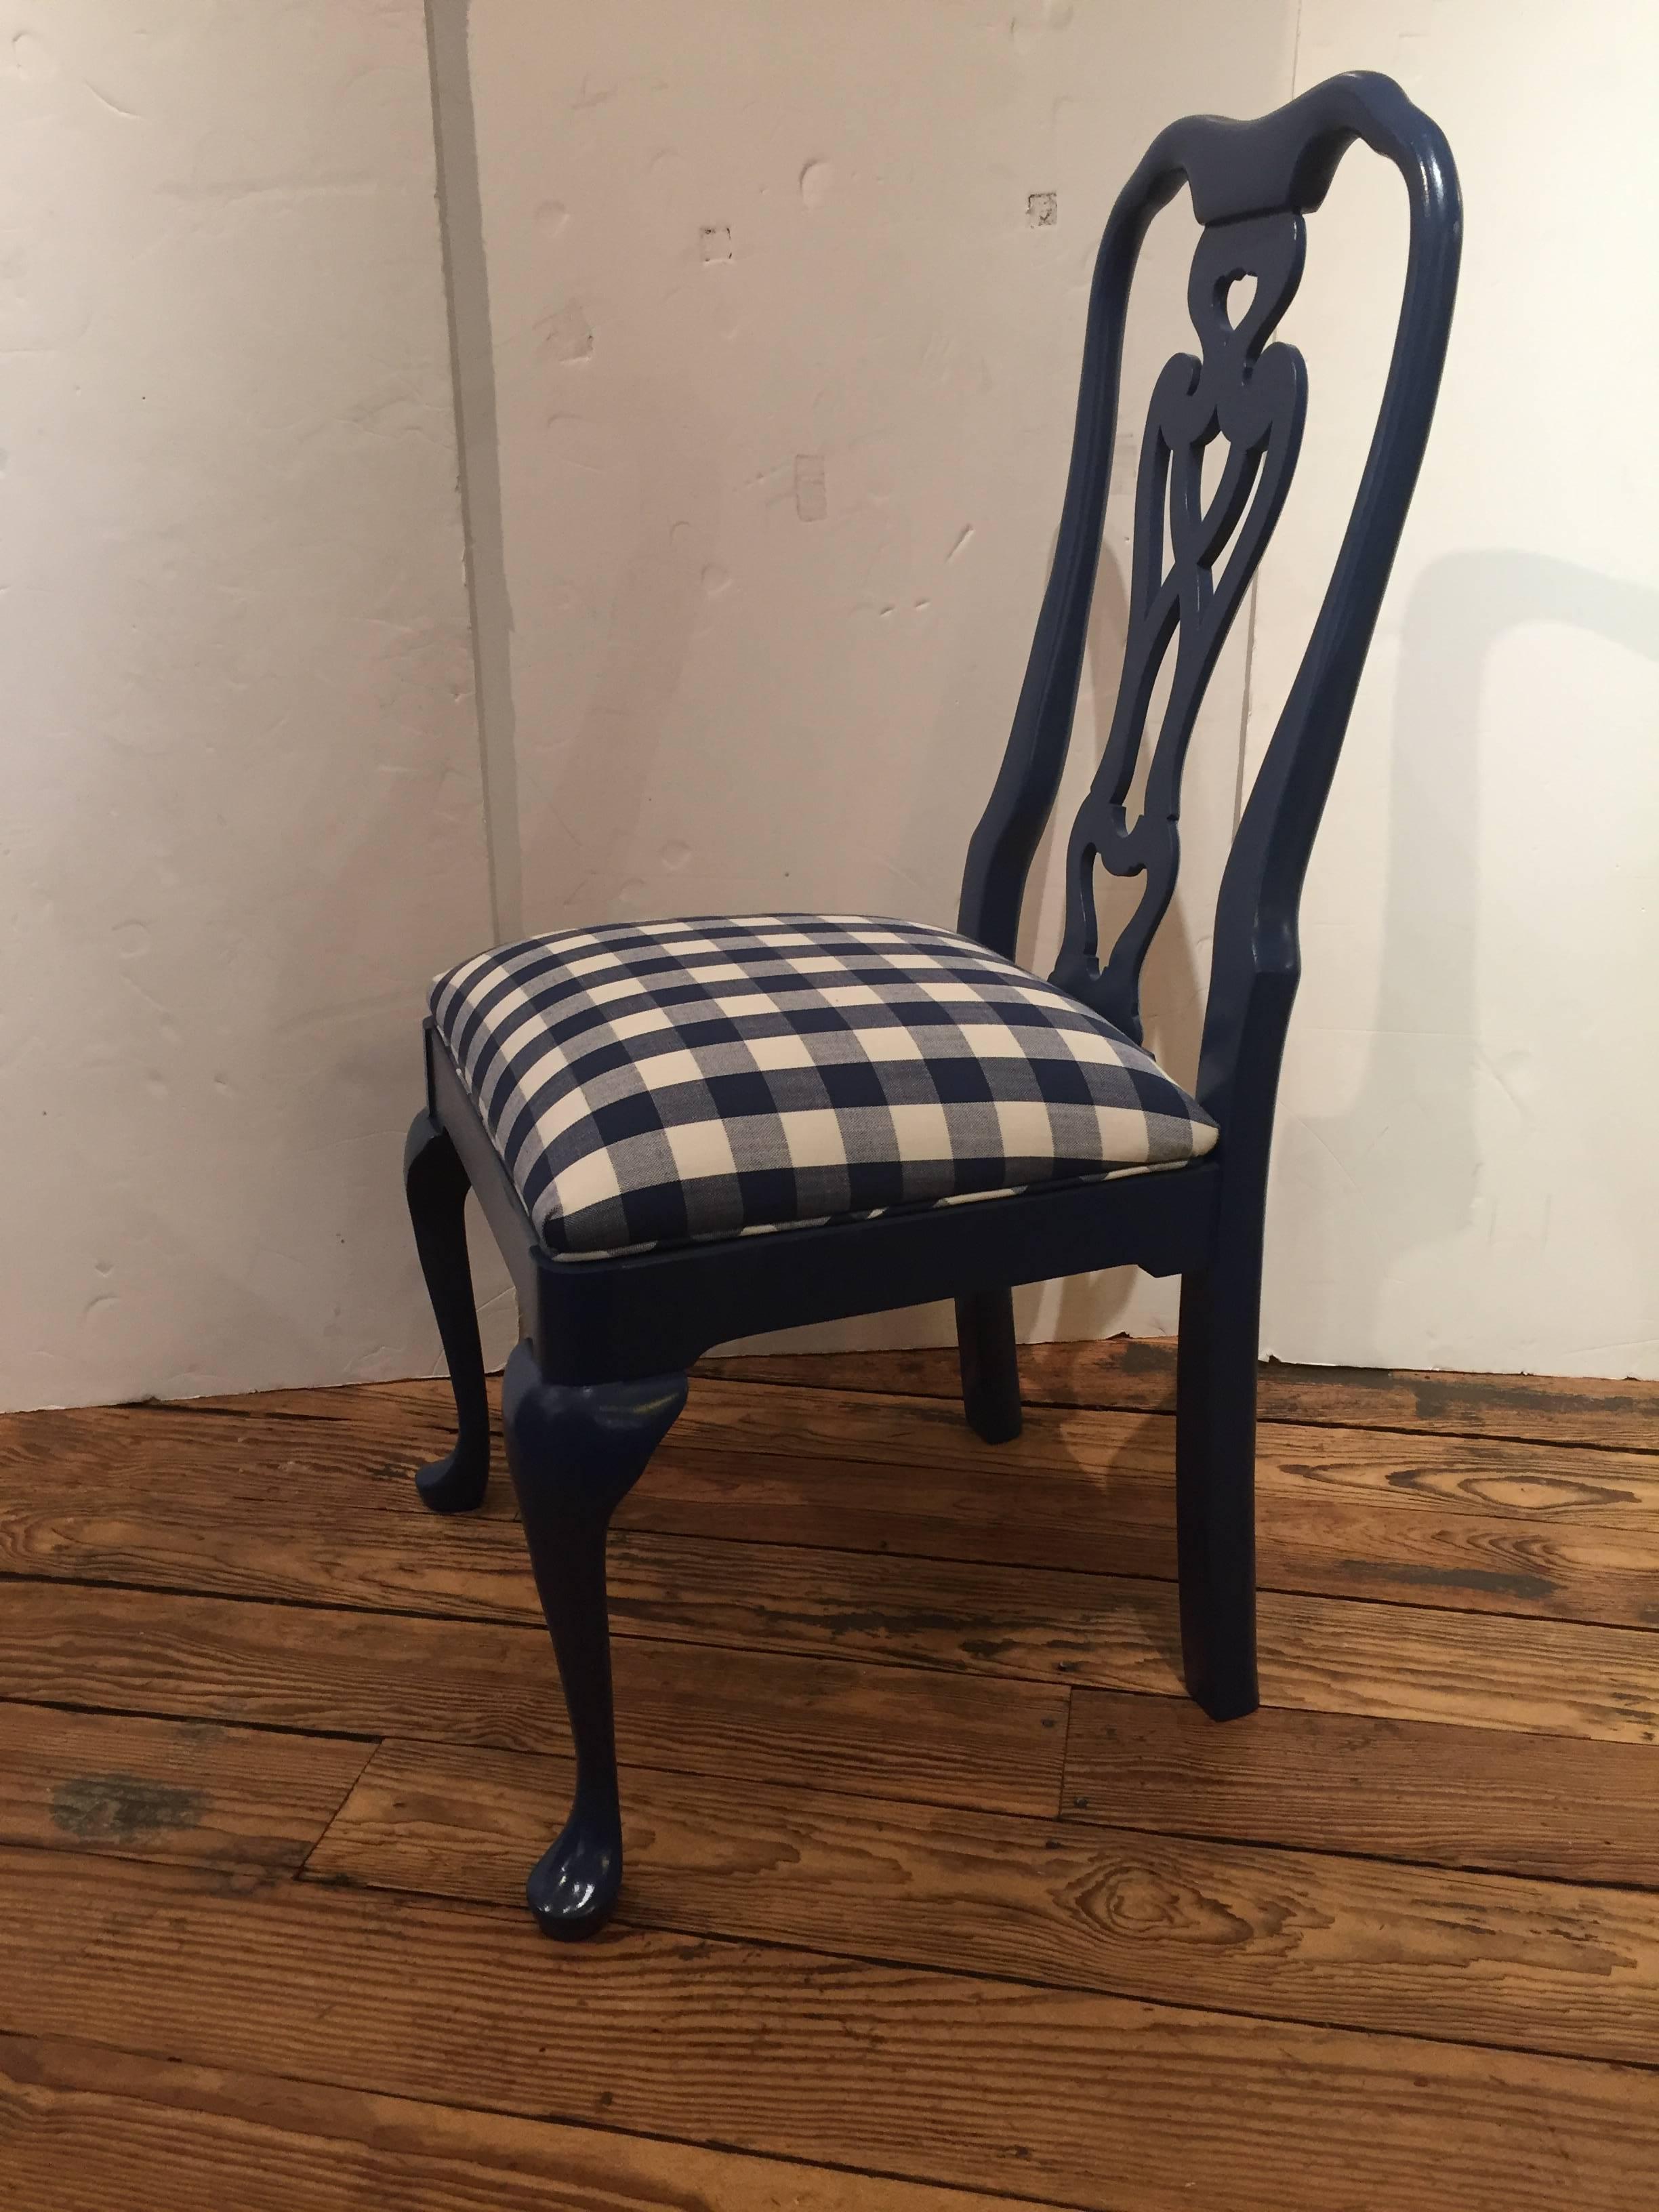 American Sensational Set of Six Lacquered and Gingham Upholstered Dining Chairs